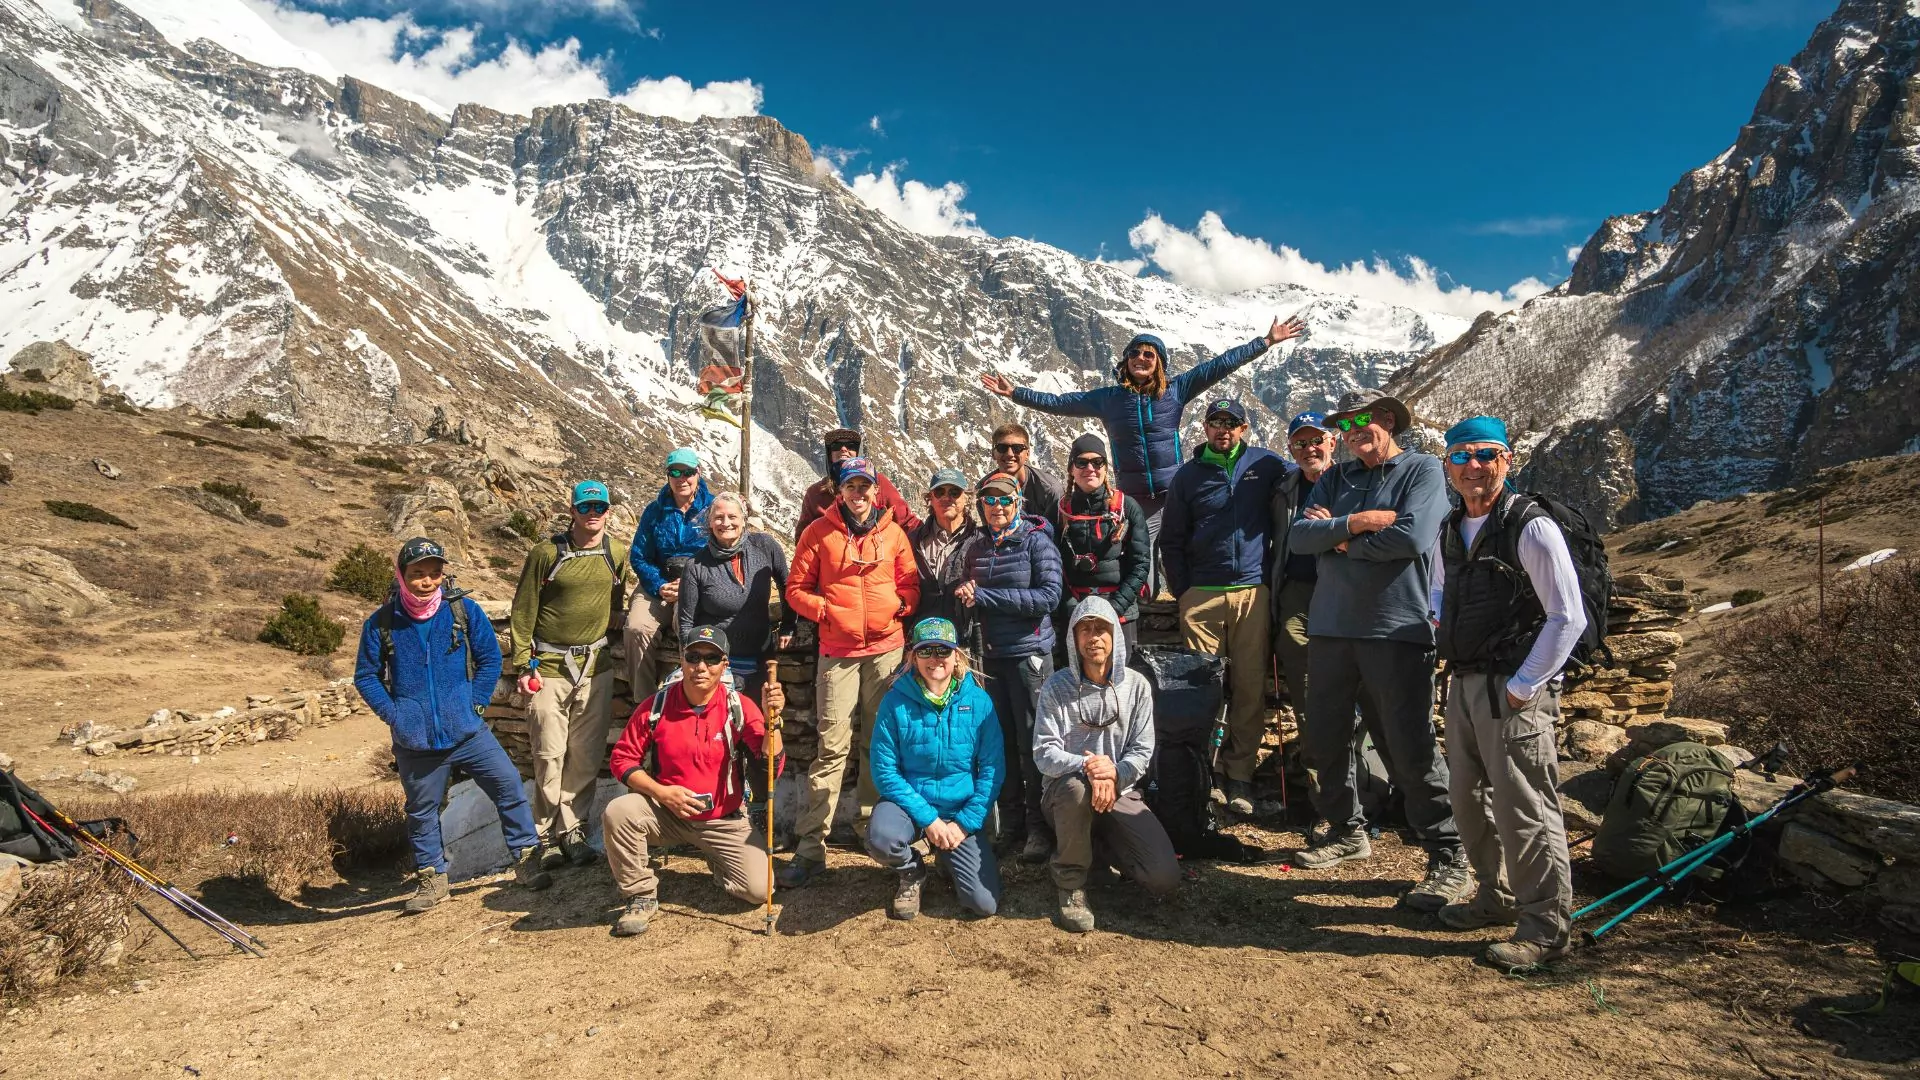 A group of happy hikers pose together in the mountains